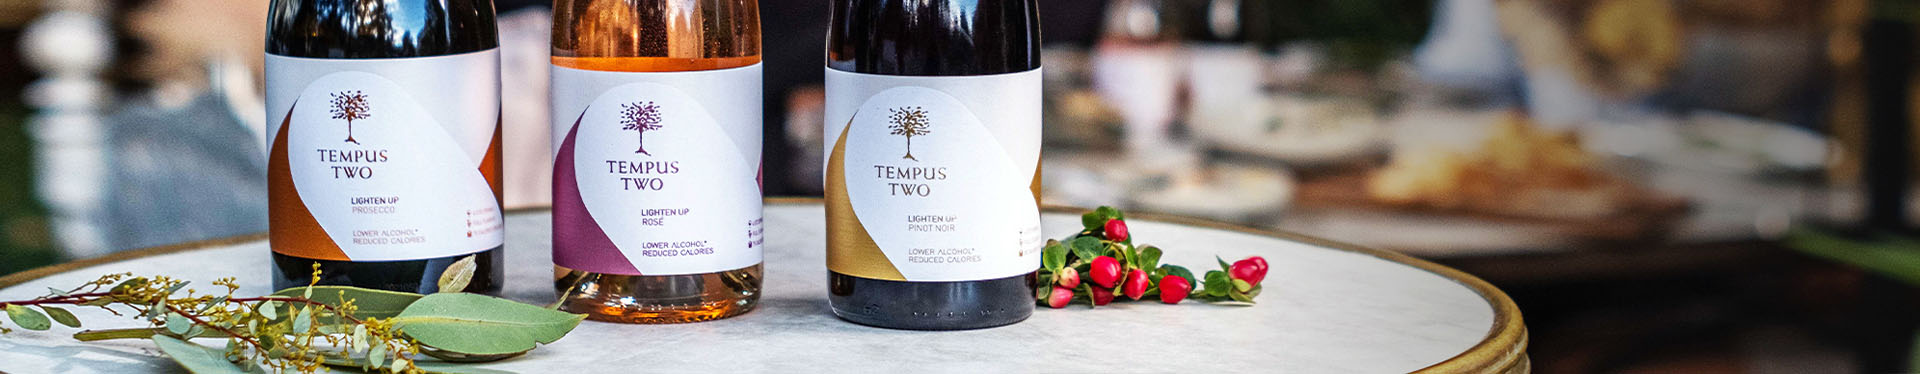 Tempus Two lower alcohol Lighten Up Range on a table